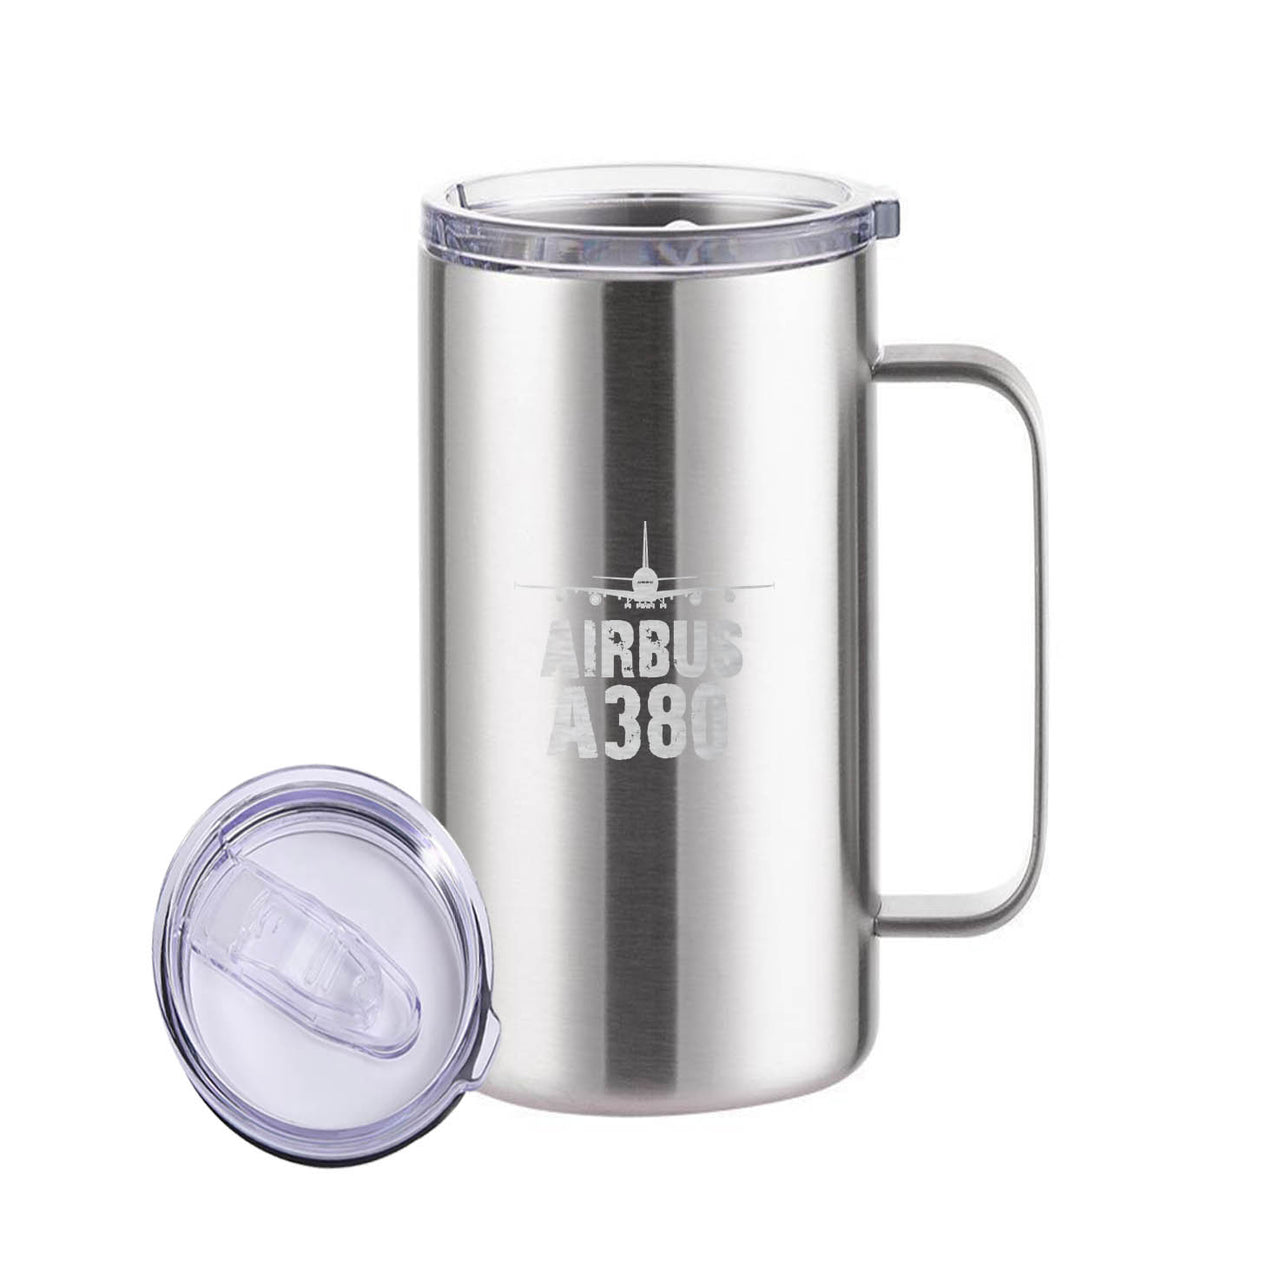 Airbus A380 & Plane Designed Stainless Steel Beer Mugs